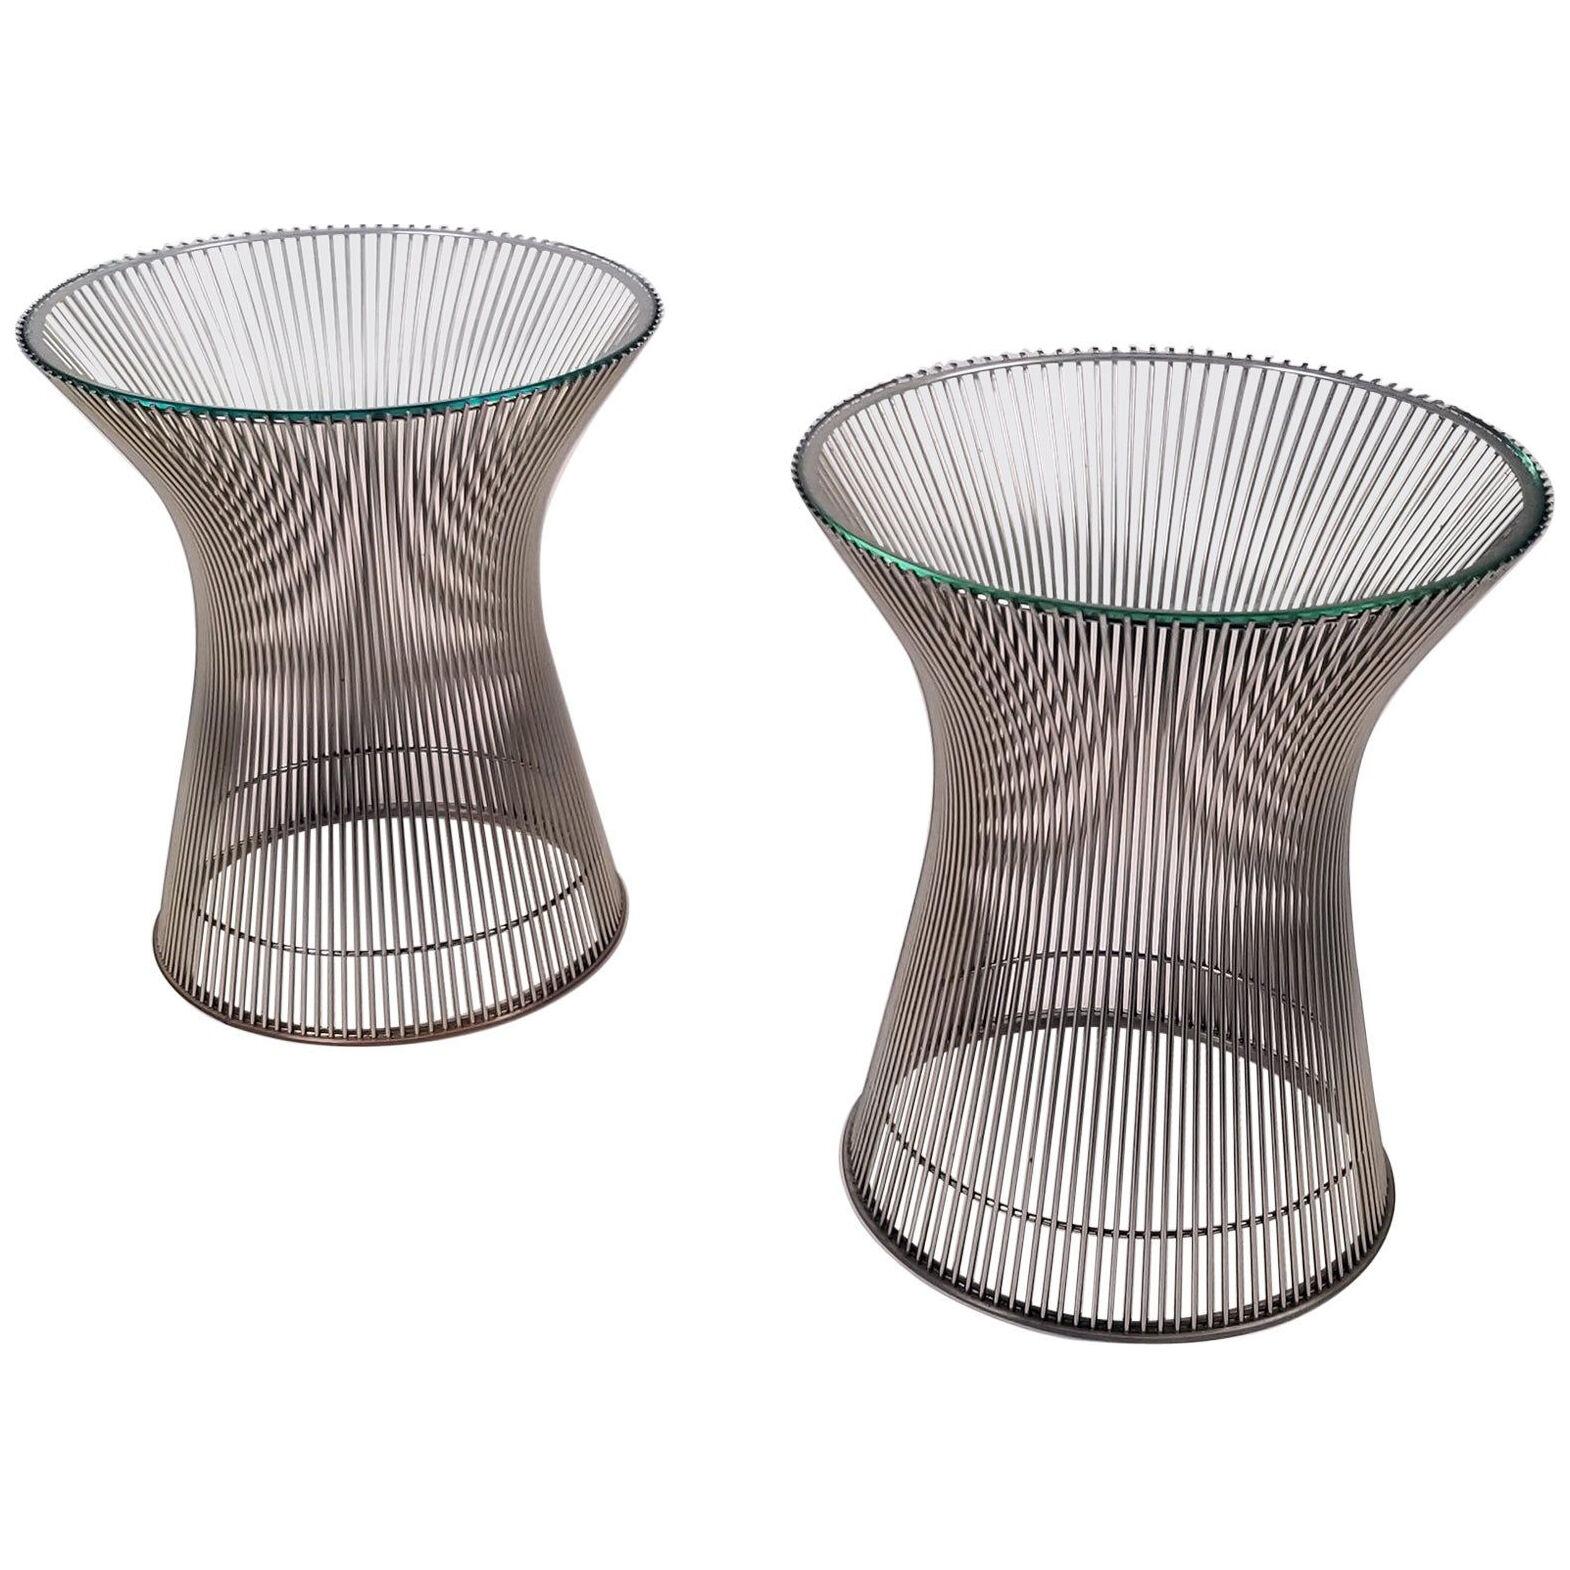 Early Side Tables Designed by Warren Platner for Knoll